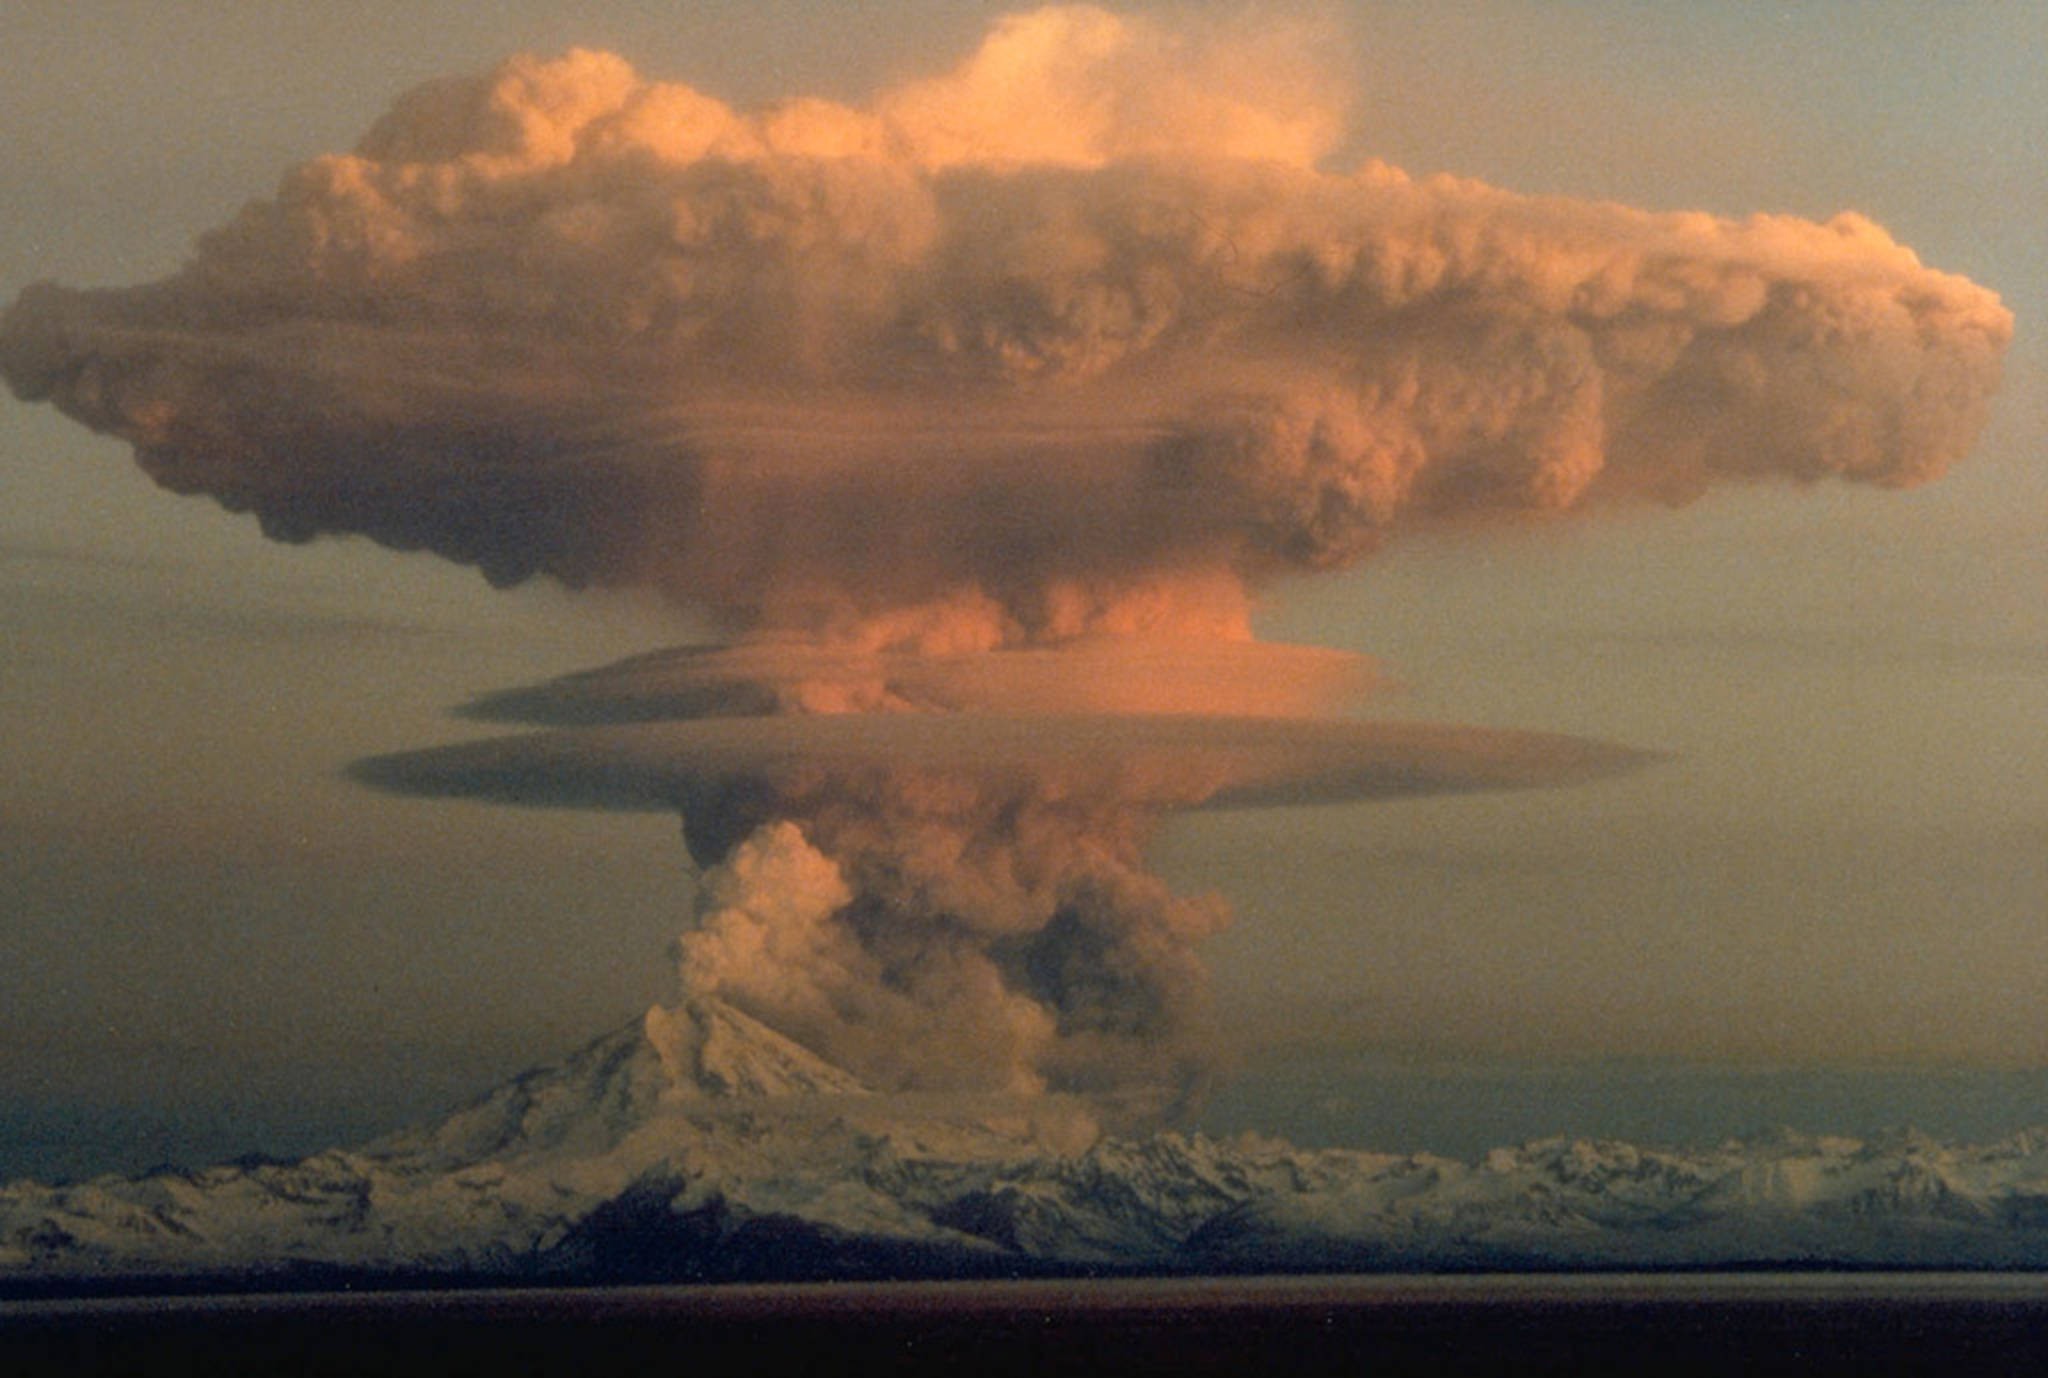 Mount Redoubt west of Kenai erupts an ash cloud on April 21, 1990, during the same unrest that launched the fledgling Alaska Volcano Observatory. (Courtesy Photo | Robert Clucas)